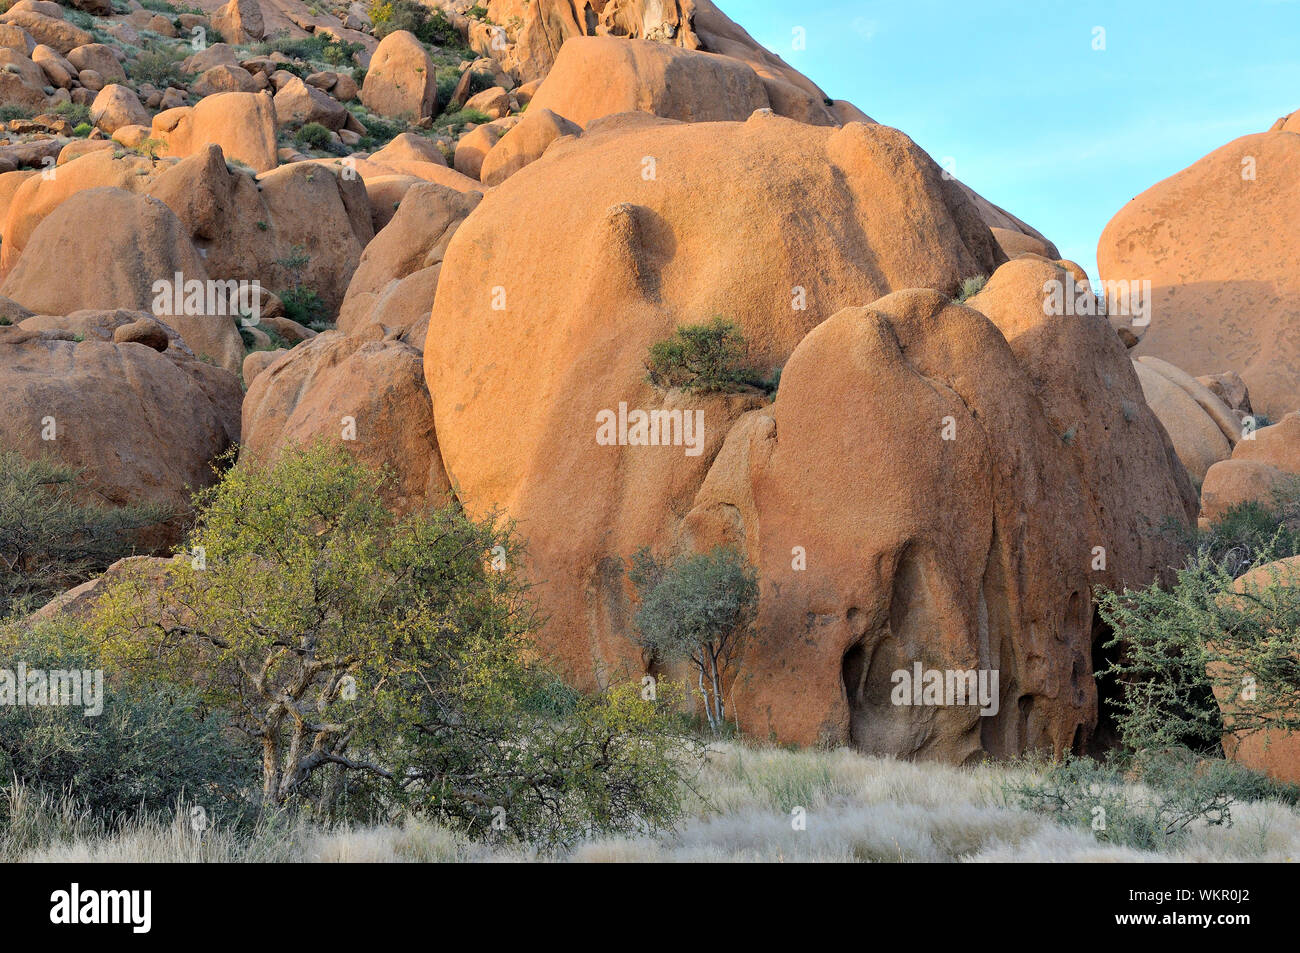 Rock formation at Spitzkoppe near Usakos in Namibia Stock Photo